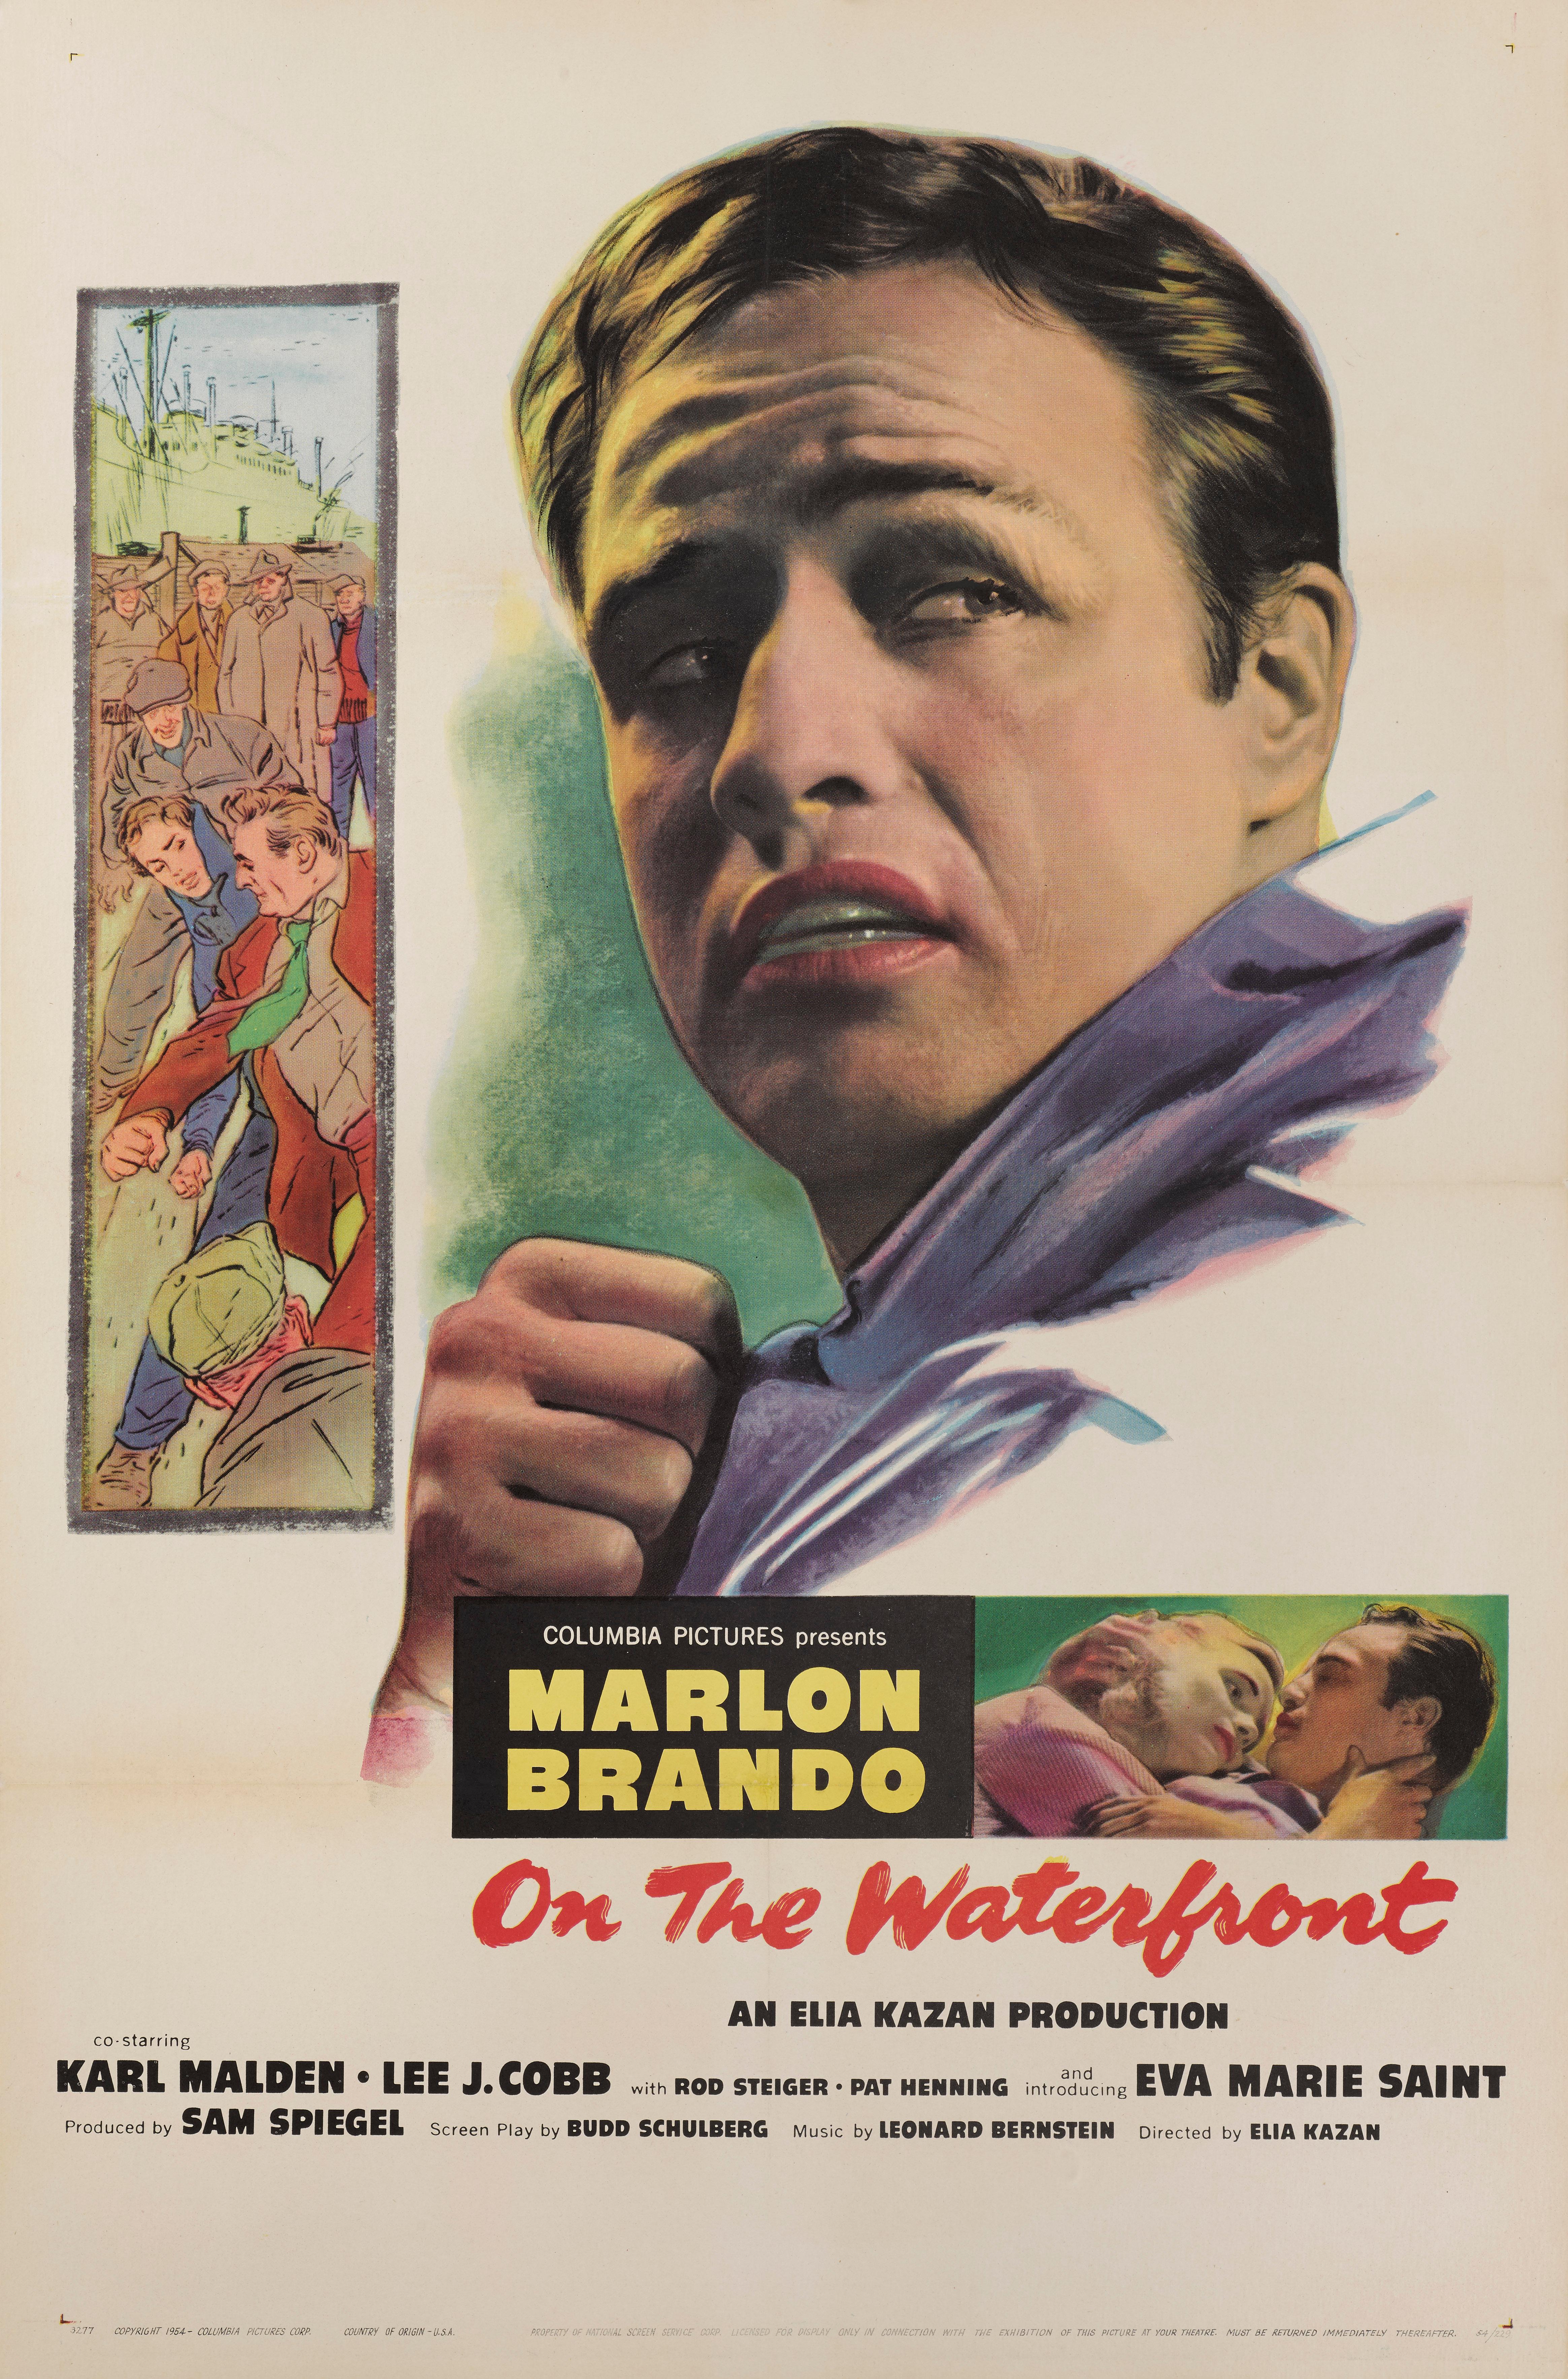 Original US film poster from (1954) 41 x 27 in. (104 x 69 cm)
This poster would have been used outside the cinema at the films original release.
This is a Classic American crime drama it received 12 Academy Award nominations, winning eight,